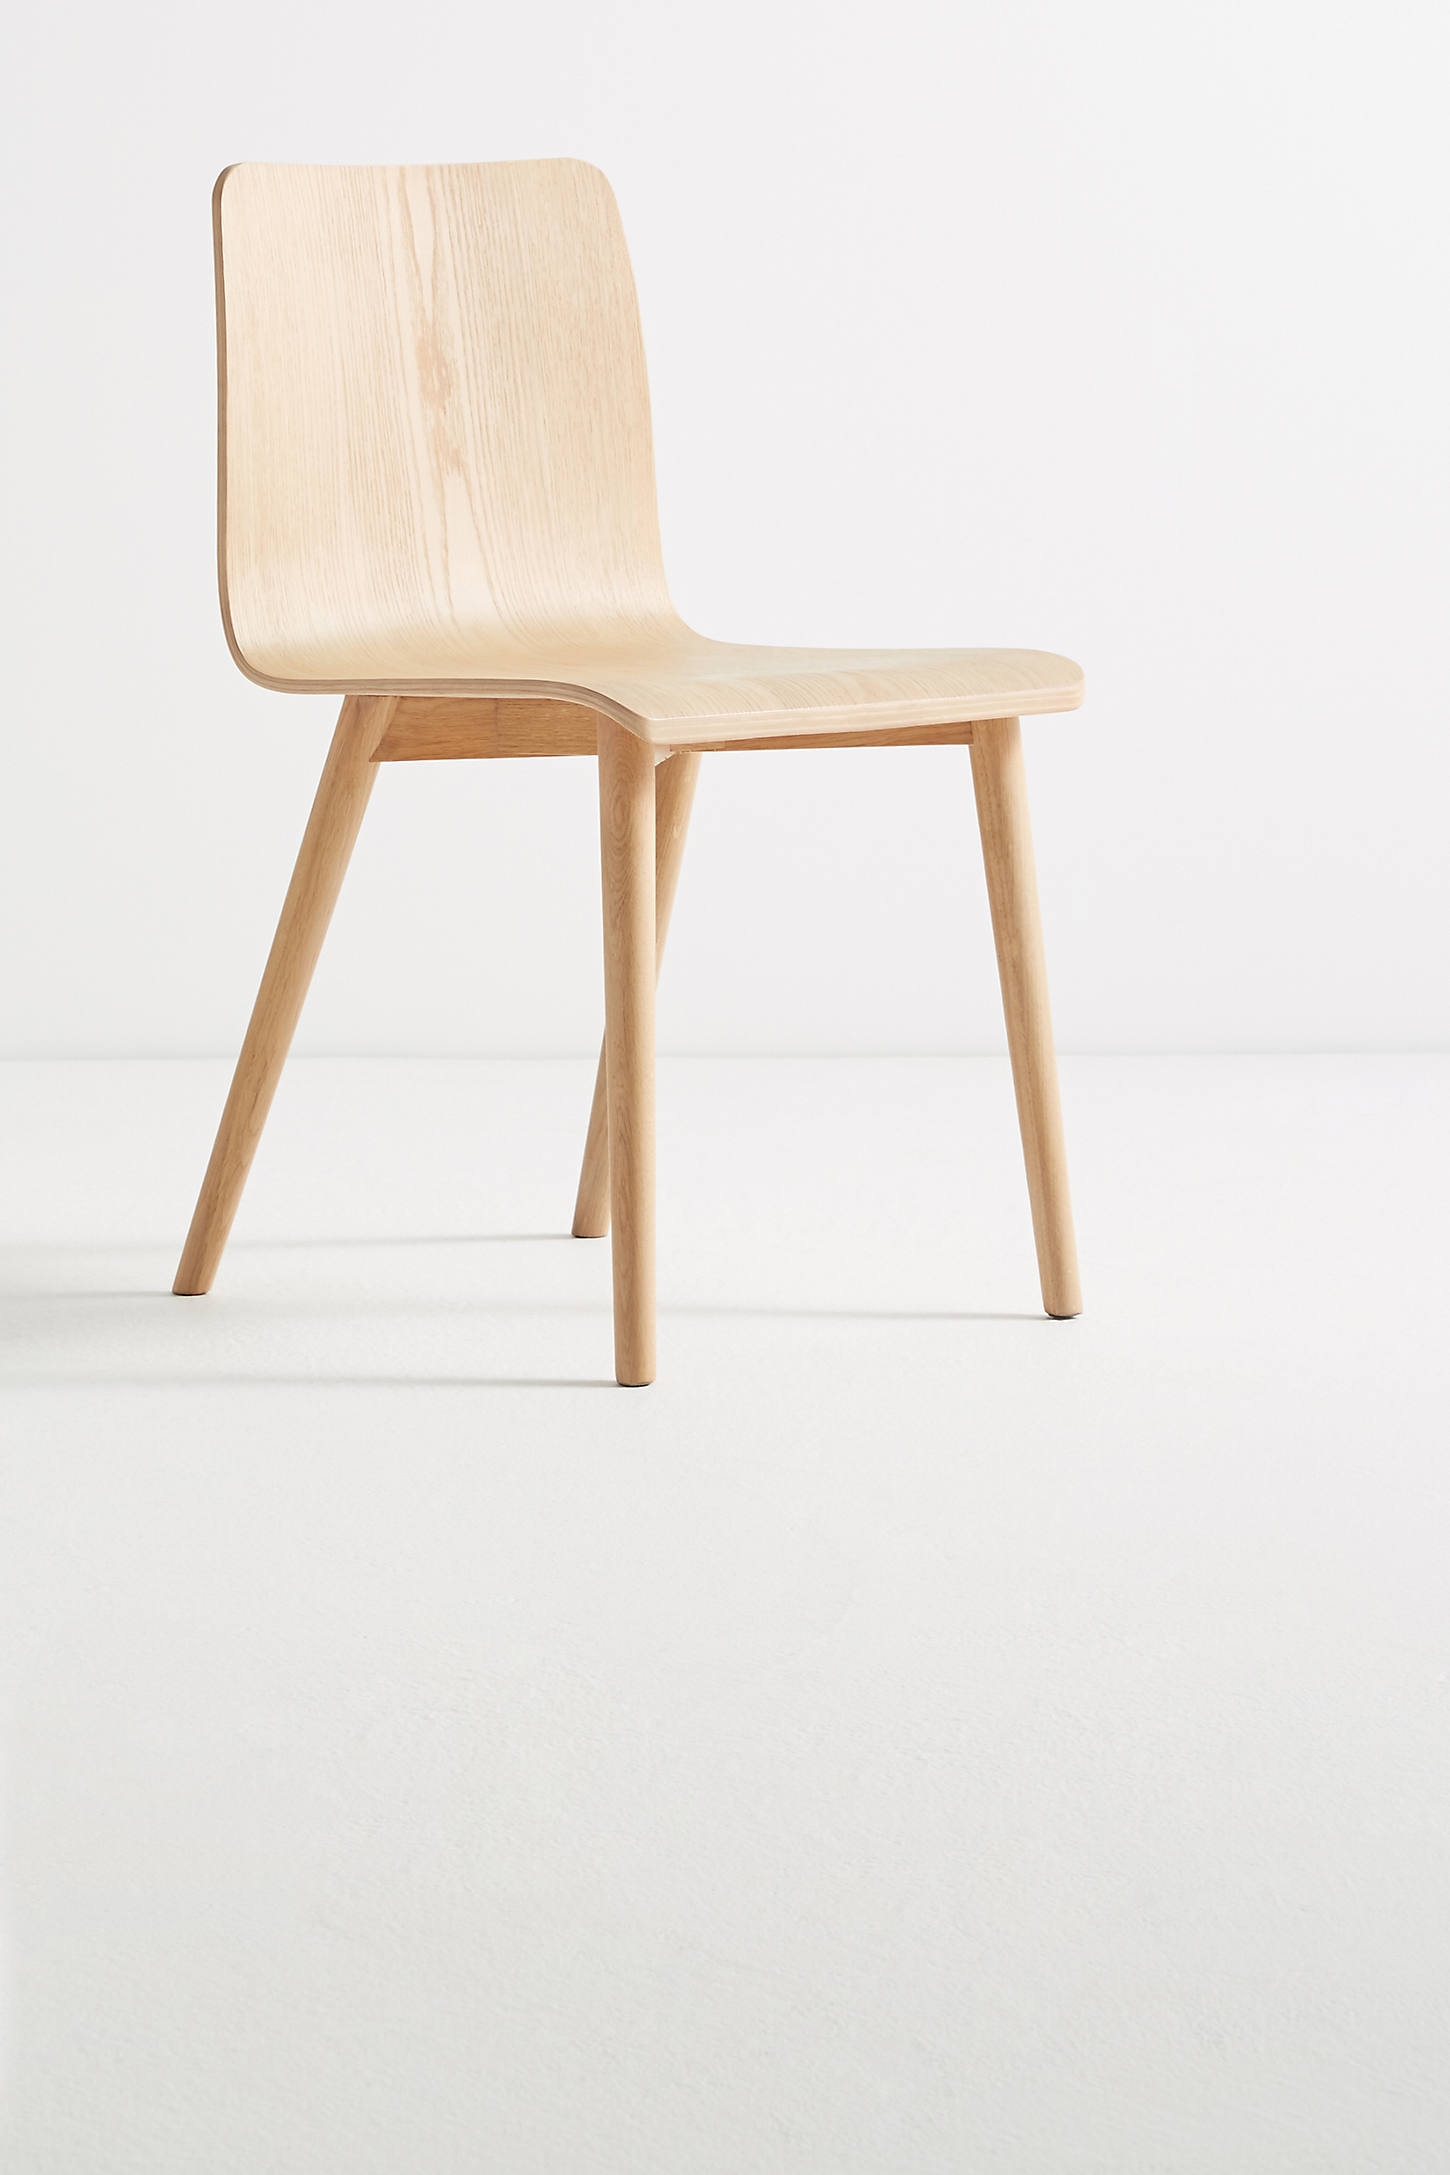 Lovell Chair - Image 0